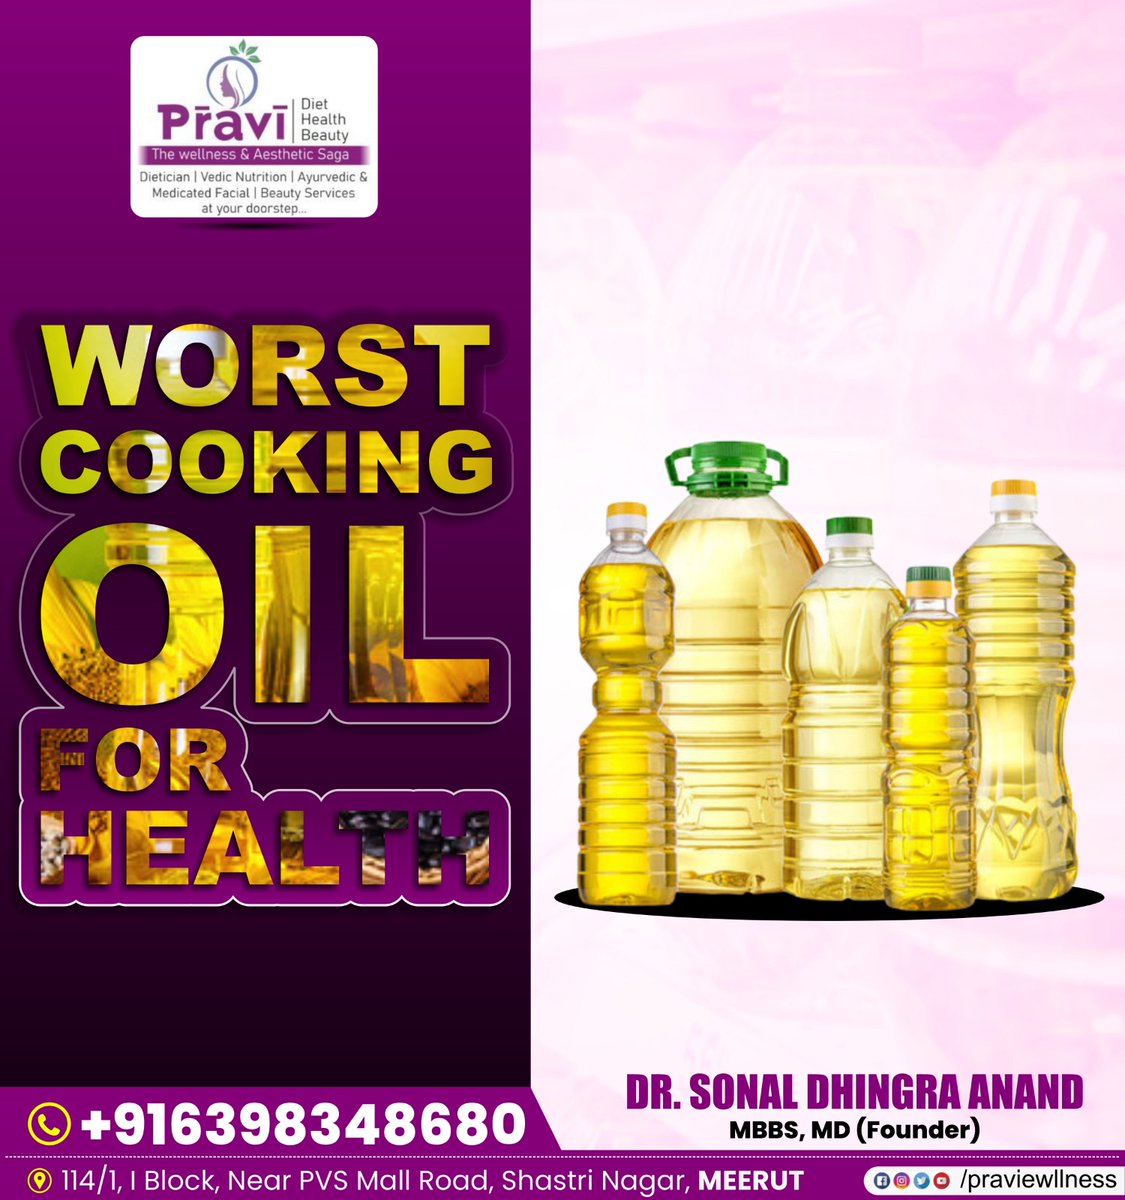 👉𝐖𝐎𝐑𝐒𝐓 𝐂𝐎𝐎𝐊𝐈𝐍𝐆 𝐎𝐈𝐋 𝐅𝐎𝐑 𝐇𝐄𝐀𝐋𝐓𝐇

#kidney #kidneyprotection #bloodsugar #cholesterol #omega #bestfoods #praviwellness #healthyfood #disease #summerweather #heat #dairyproducts #leanprotein #nutrition #tips #healthydiet #healthylife #eatwell #beautycentre